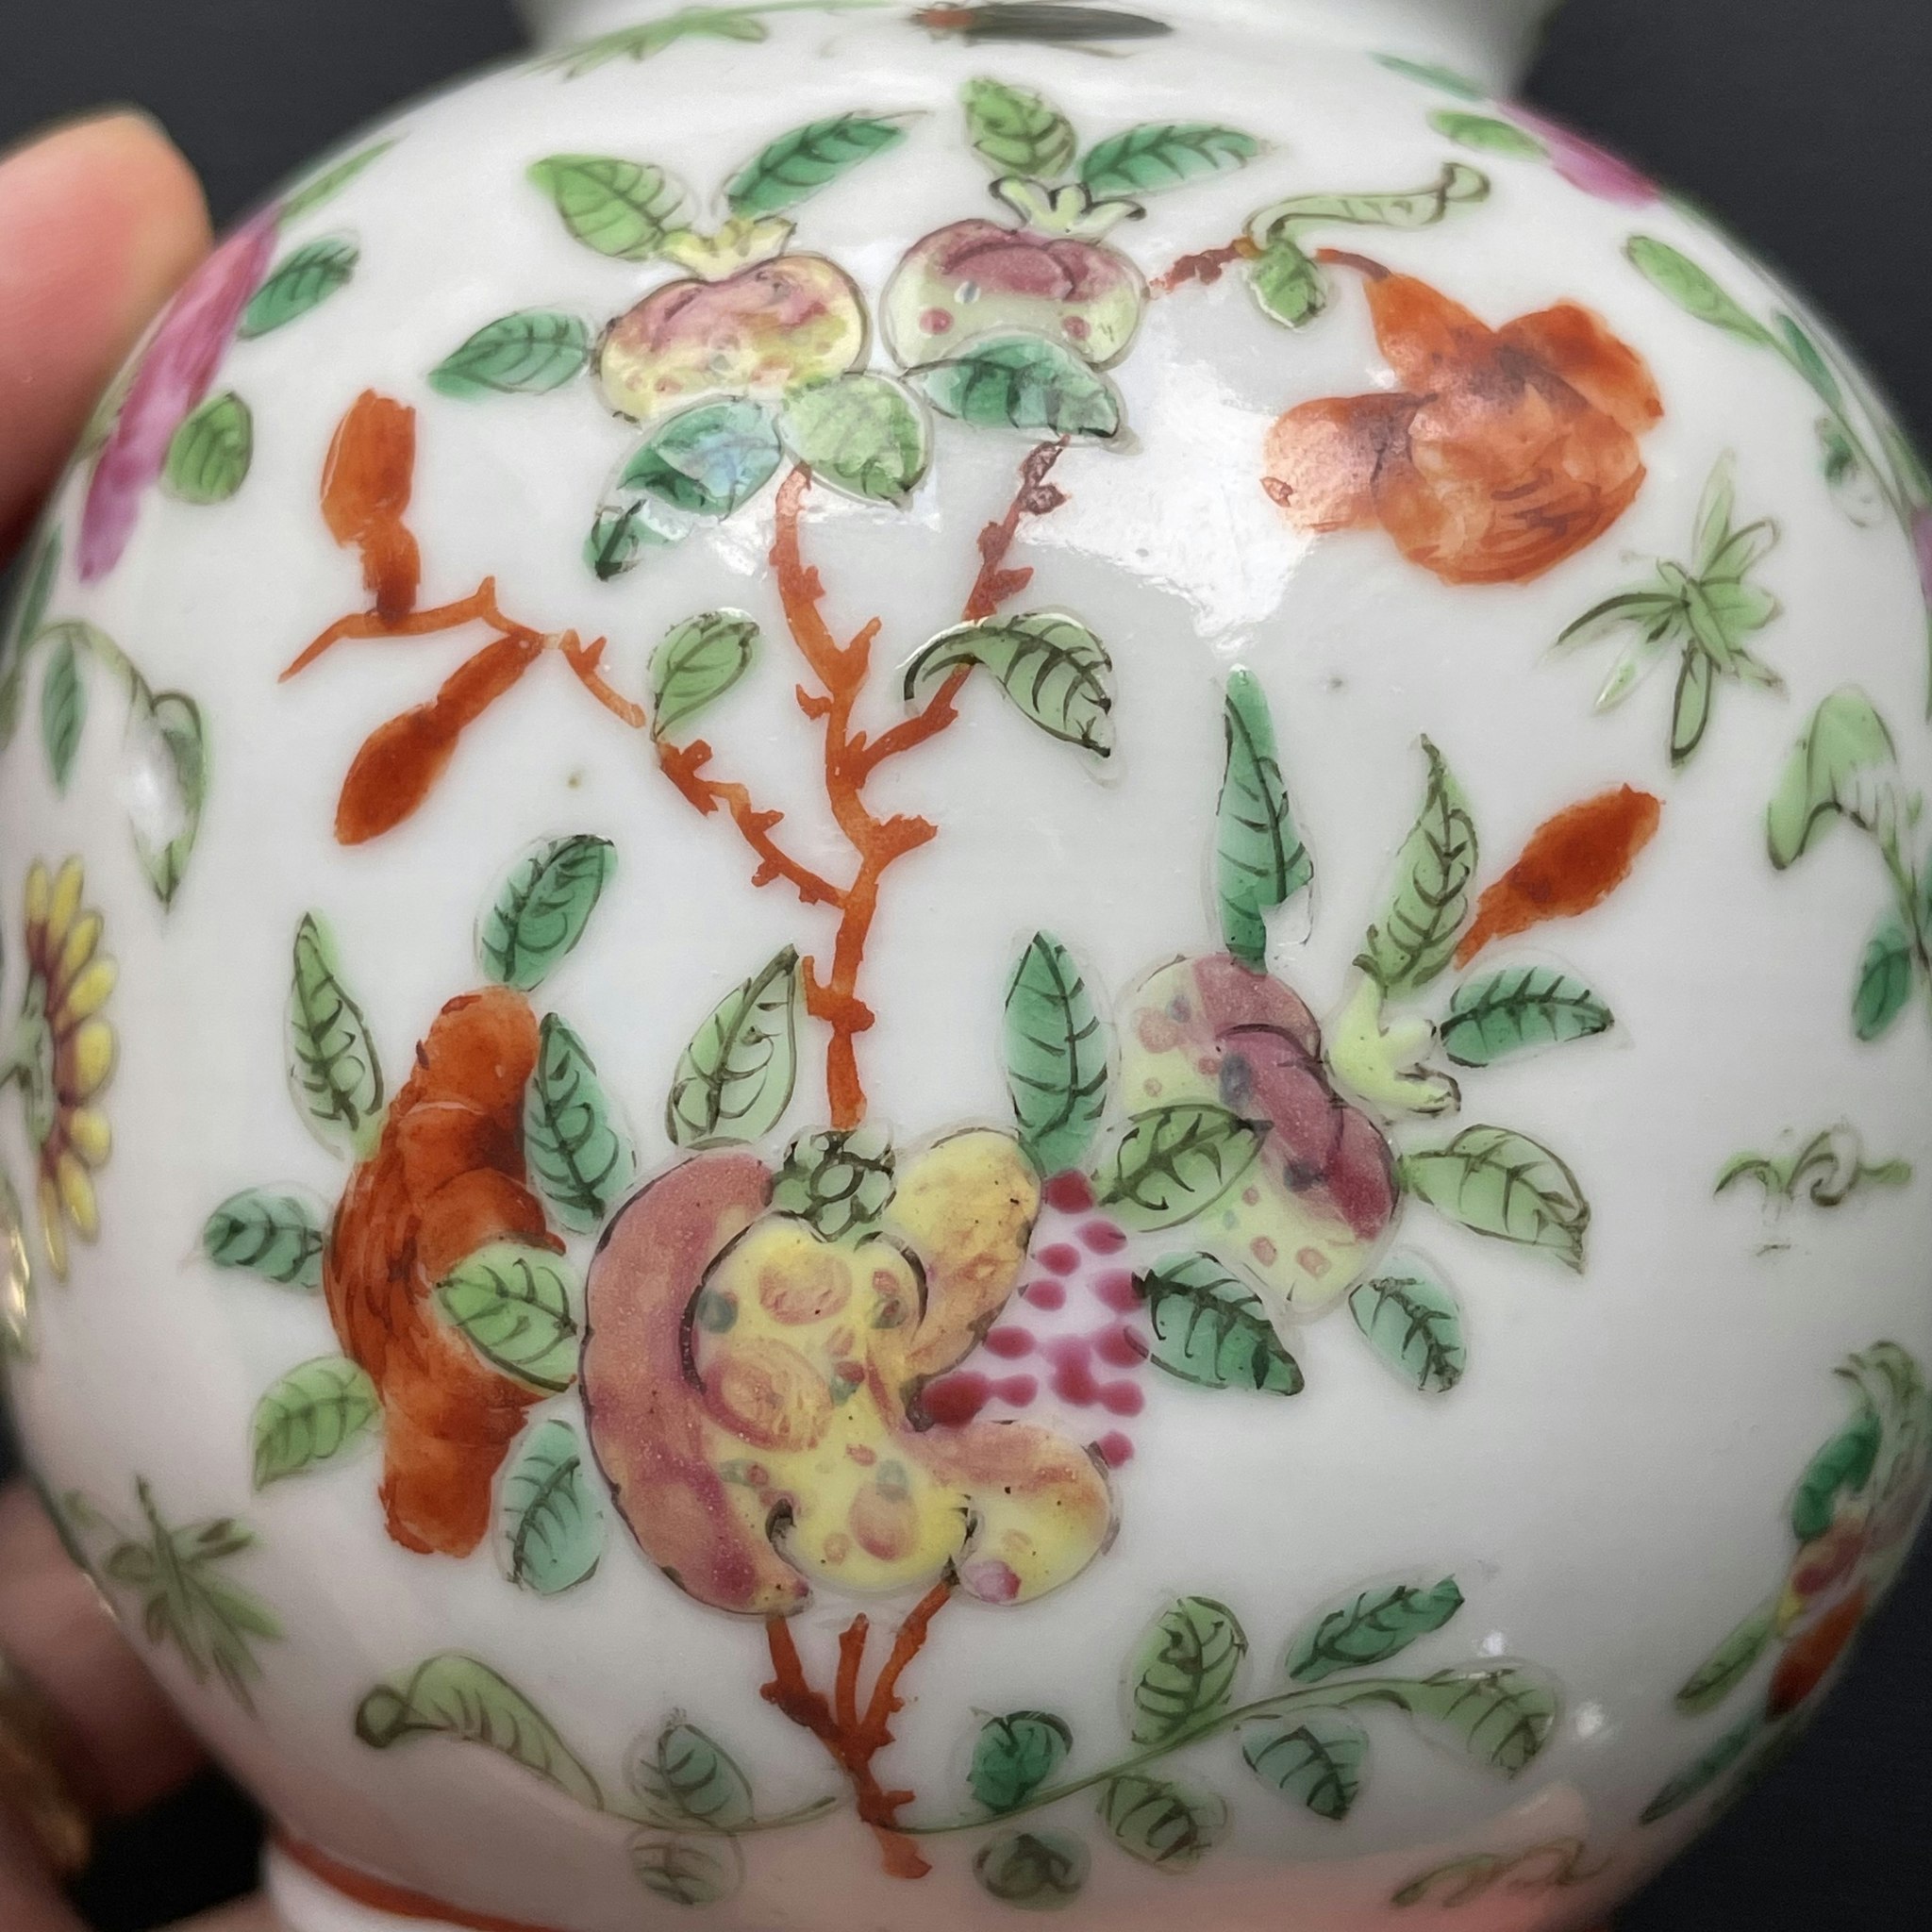 Antique Chinese Double Gourd Vase, Qing Dynasty Mid 19th c #1251